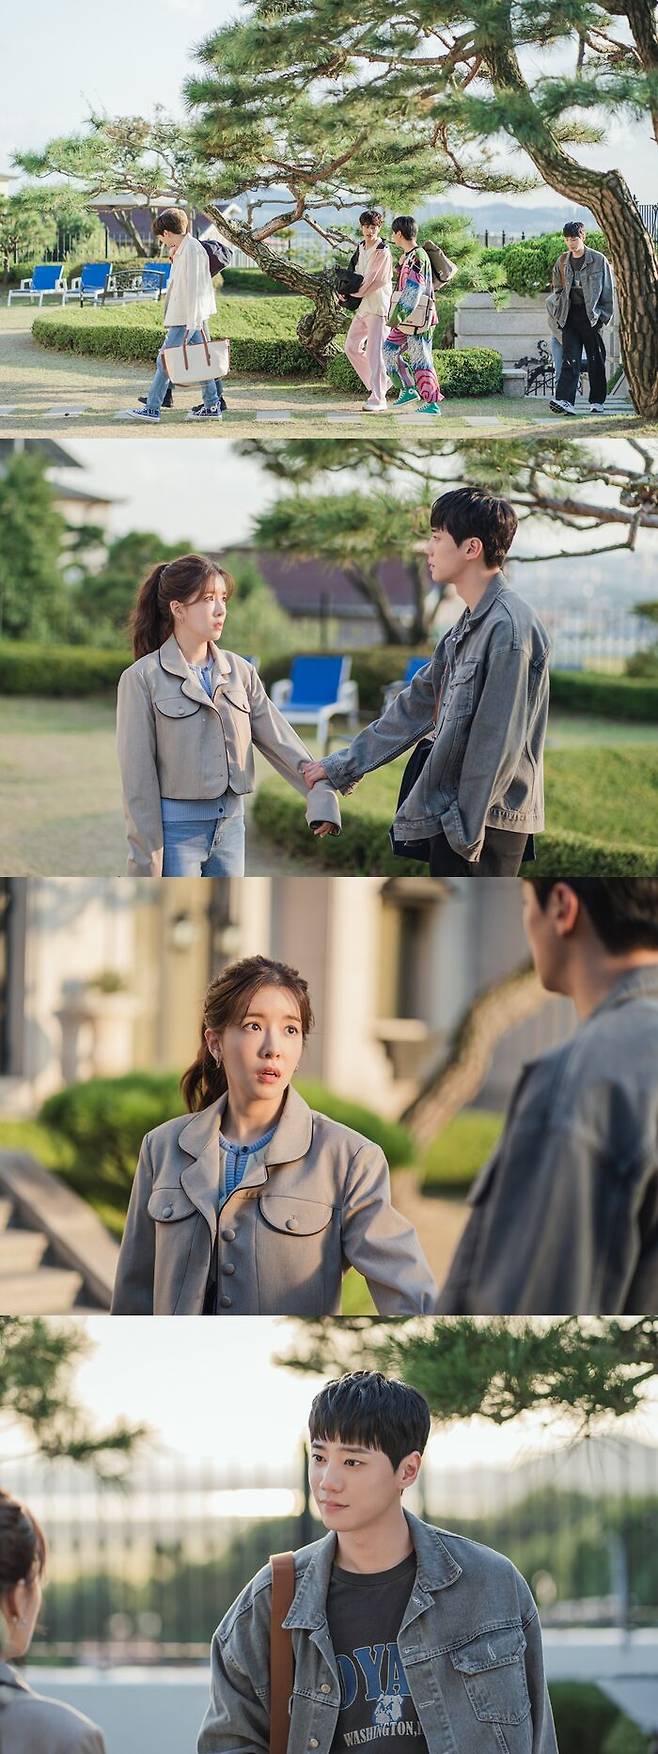 Jung In-sun and Lee JunYoung of the Drama I will be your night were detected after the kiss.On the 6th, SBS Sunday Drama Ill Be Your Night (playplayplay by Seo Jeong-eun Hae Yeon, directed by Ahn Ji-sook) released a still cut featuring In Yun-joo (Jung In-sun) and Yoon Tae-in (Lee JunYoung).I will be your night is a work that depicts the sweet and bloody mental healing romance of a world star idol suffering from sleepwalking and a doctor who has to treat it secretly.The photos released on the day show Luna, In Yun-joo and Yoon Tae-in returning from Camping.Luna members seem to be enjoying the journey as if the journey has not yet gone, but there is a serious atmosphere between In Yun-joo and Yoon Tae-in, which stimulates curiosity.In particular, Yoon Tae-in is trying to talk to In Yun-joo, leaving Luna members behind, but In Yun-joo is making a complex look.Yoon Tae-in is looking at In-yoon with his eyes full of anticipation, which raises curiosity about what the two people would have talked about.Yoon Tae-in kissed his own heart after confessing his own song to In-yoon Joo at dawn when the journey of Camping was ripe.Although the two seemed to continue their full-fledged romance, there is a complicated subtle feeling in the still photo released this time, which makes them feel that there is another wall between the two.The 9th episode will be broadcast at 11:05 pm on the 9th, which will make you wonder what will happen to the two people who are close to each other and what will happen in the future.